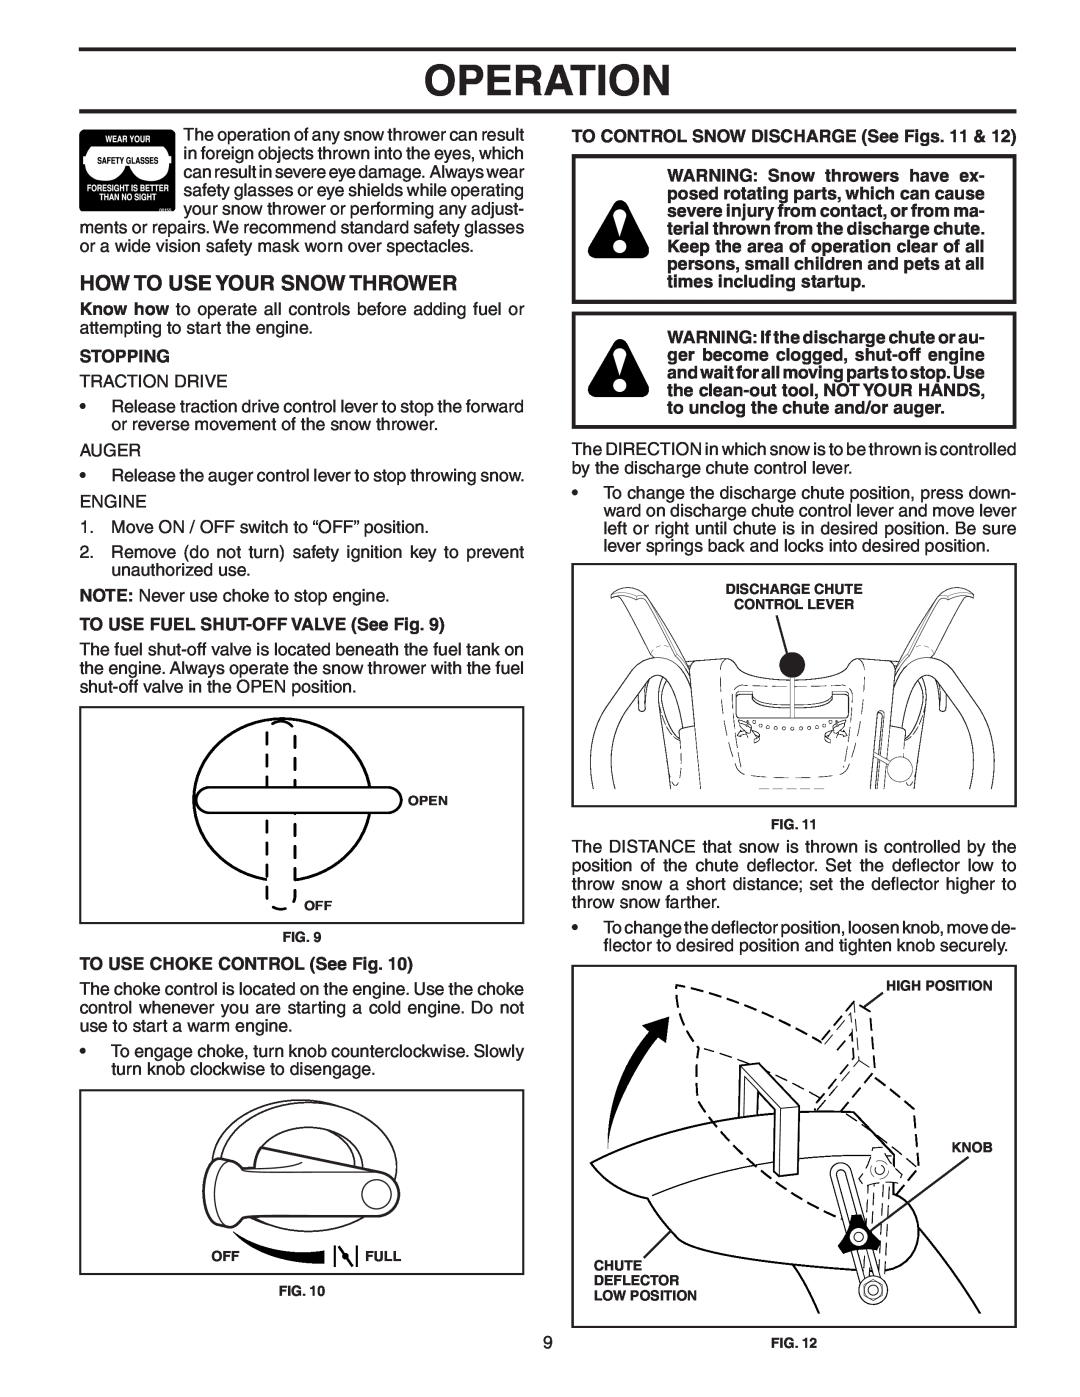 Poulan B8527ES owner manual How To Use Your Snow Thrower, Operation, Stopping, TO USE FUEL SHUT-OFF VALVE See Fig 